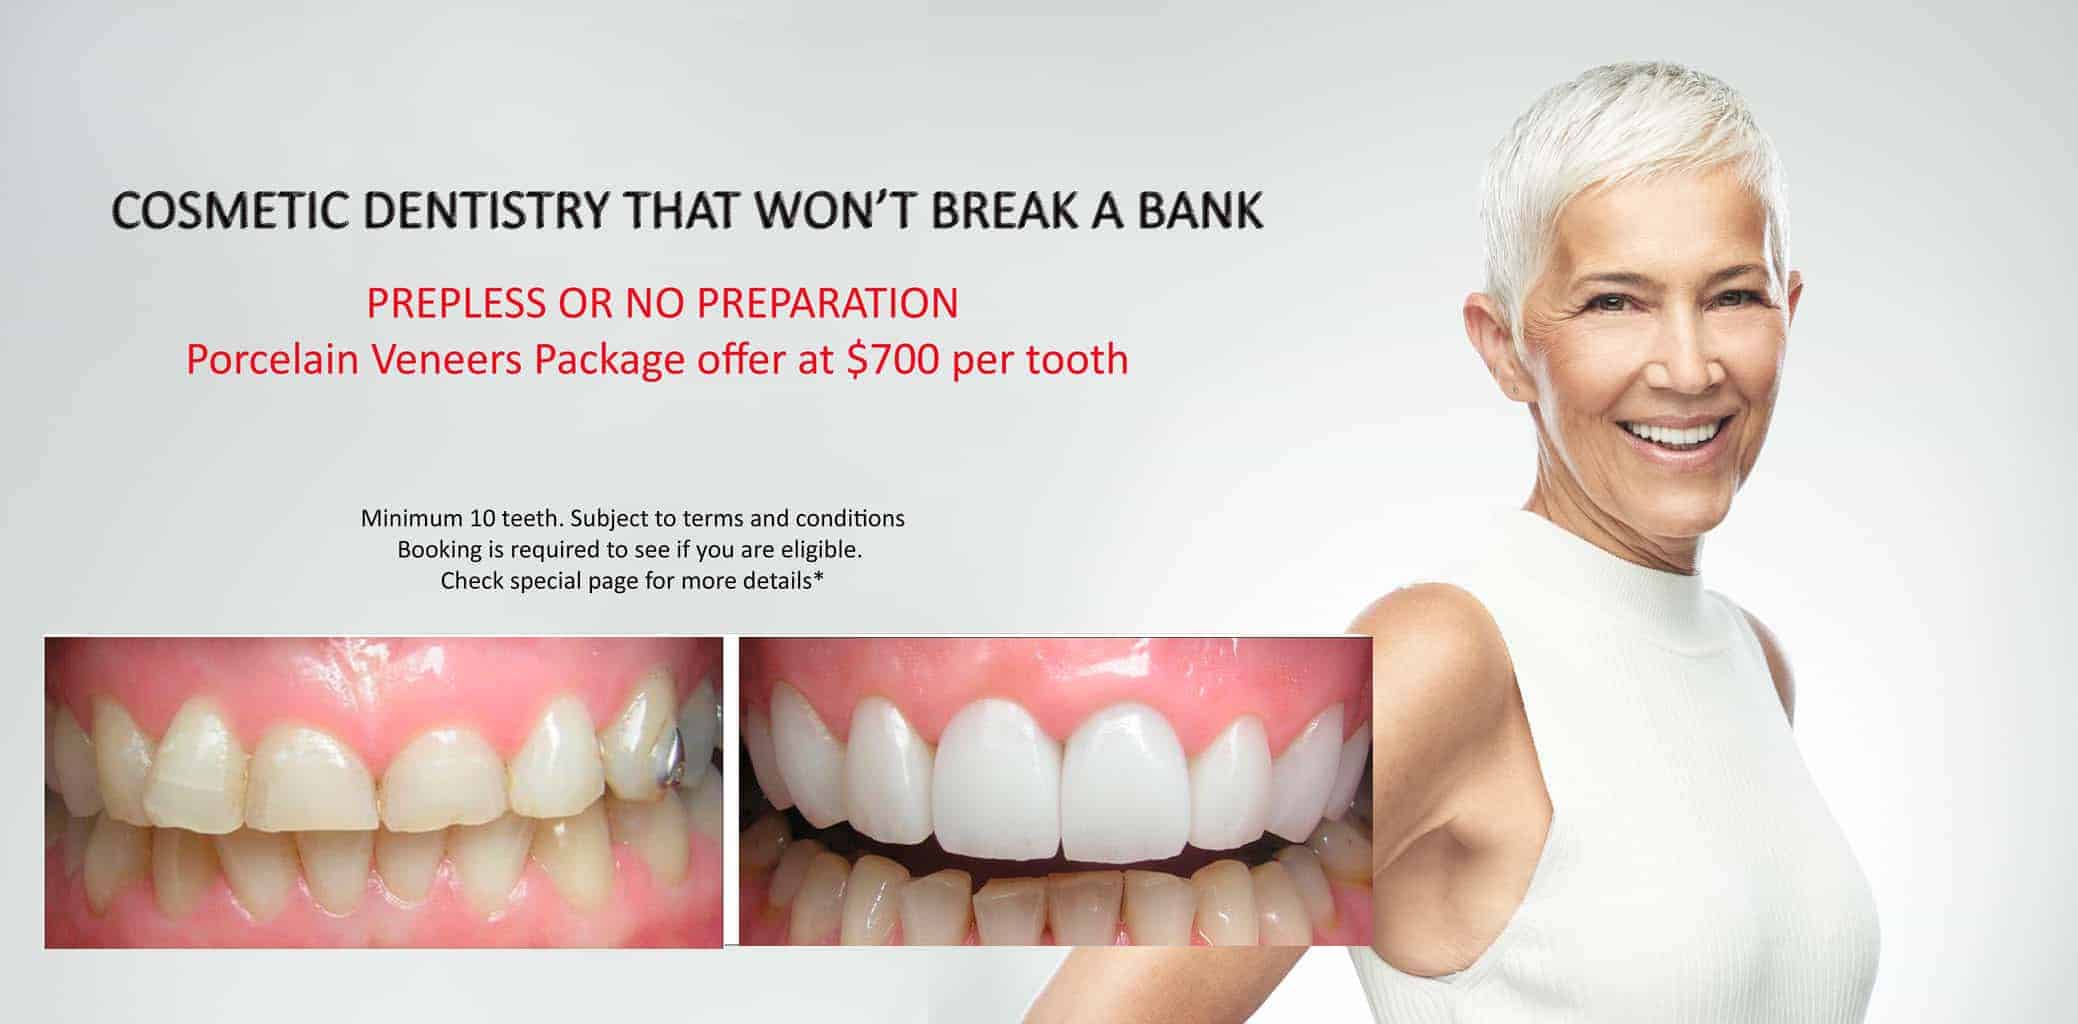 How Much Does a Smile Makeover with Porcelain Veneer Cost?